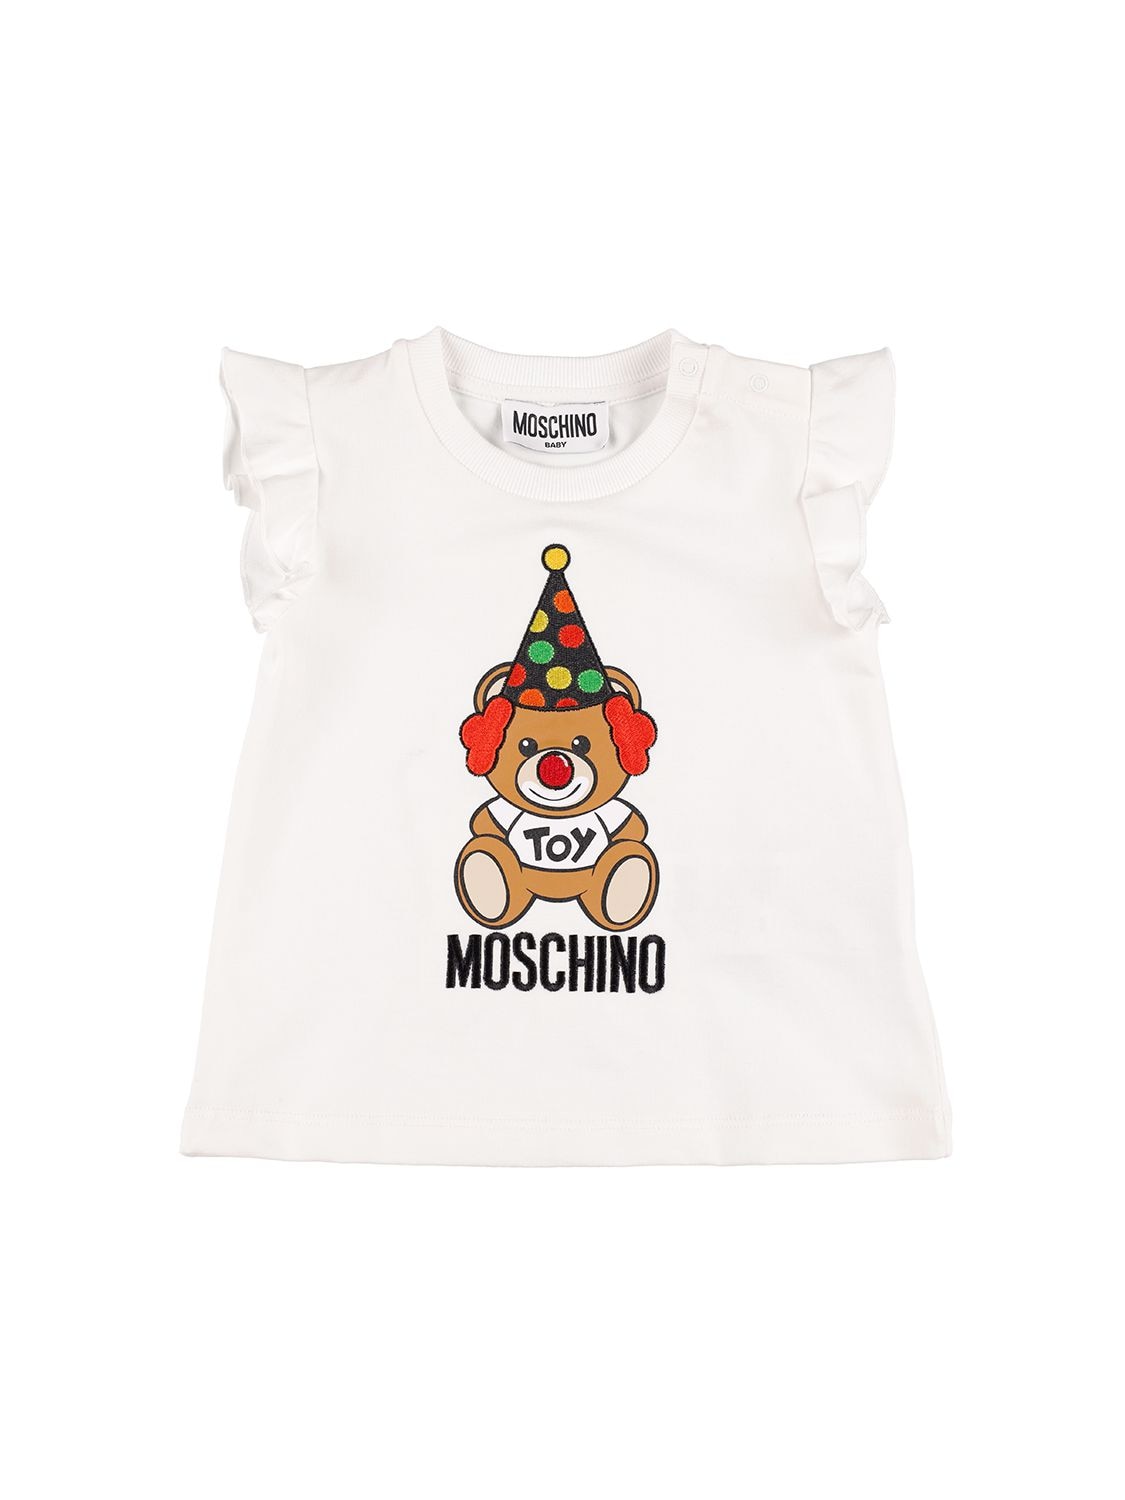 Moschino Kids' Circus Toy Logo Cotton Jersey T-shirt In White